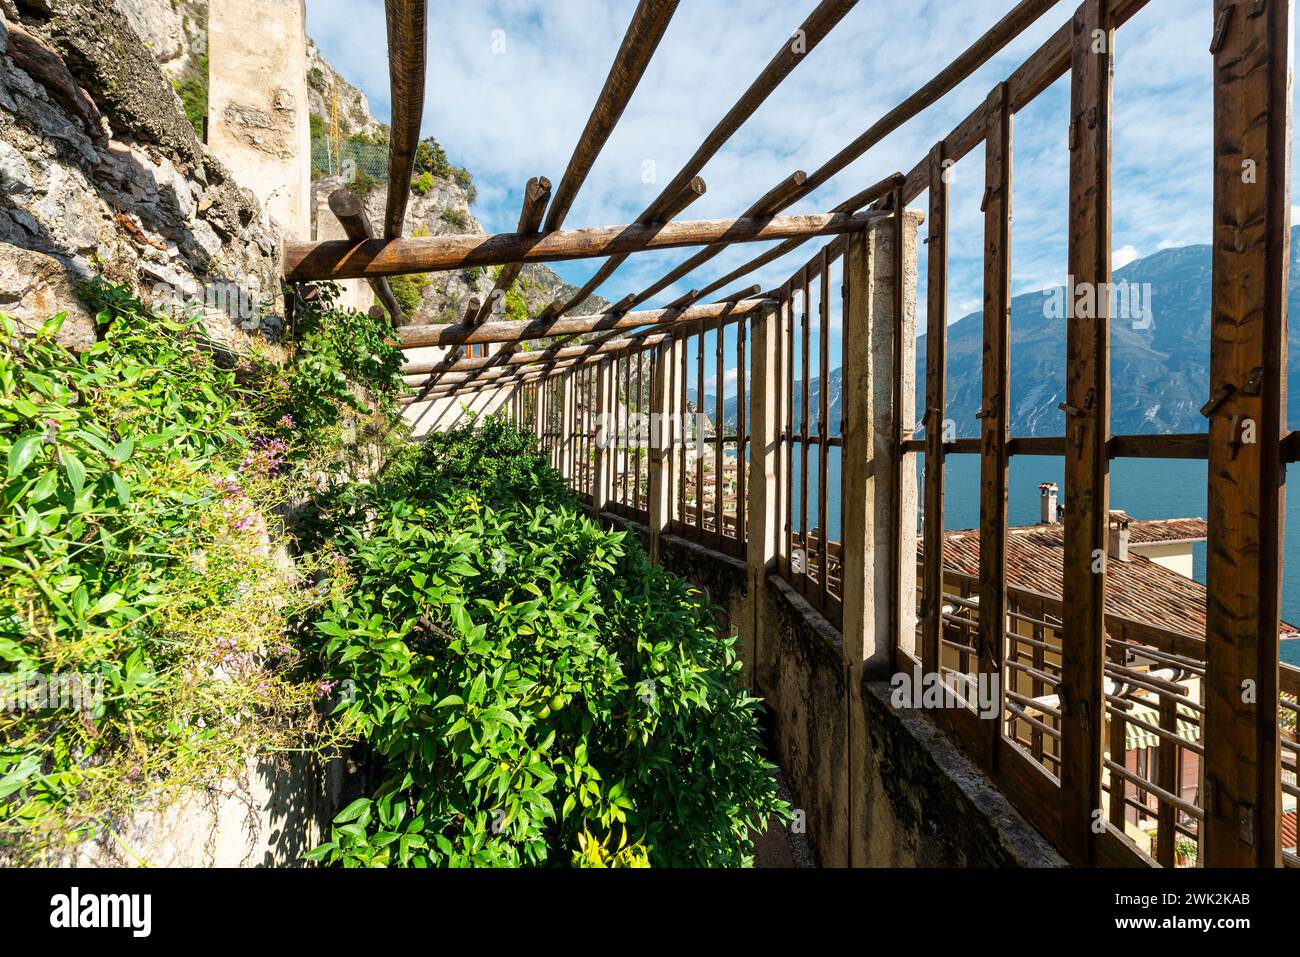 Fruit, greenhouses and lemon plantations at the Limonaia del Castel Museum in Limone on Lake Garda, Lombardy, Italy Stock Photo